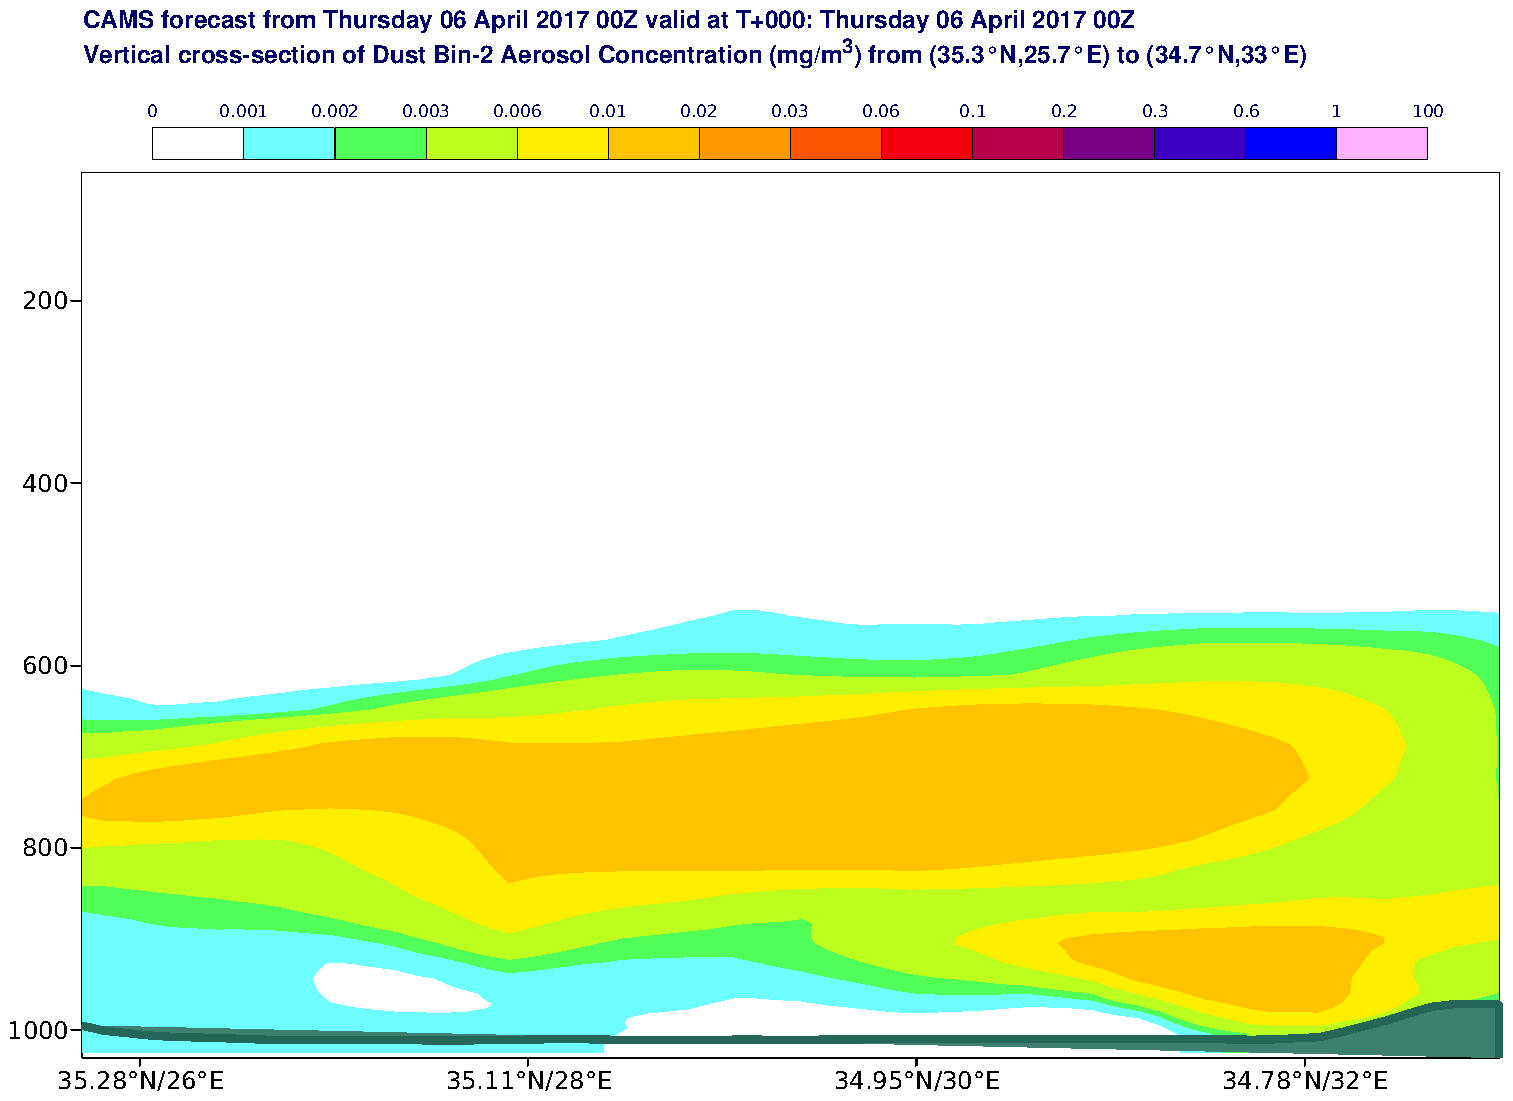 Vertical cross-section of Dust Bin-2 Aerosol Concentration (mg/m3) valid at T0 - 2017-04-06 00:00